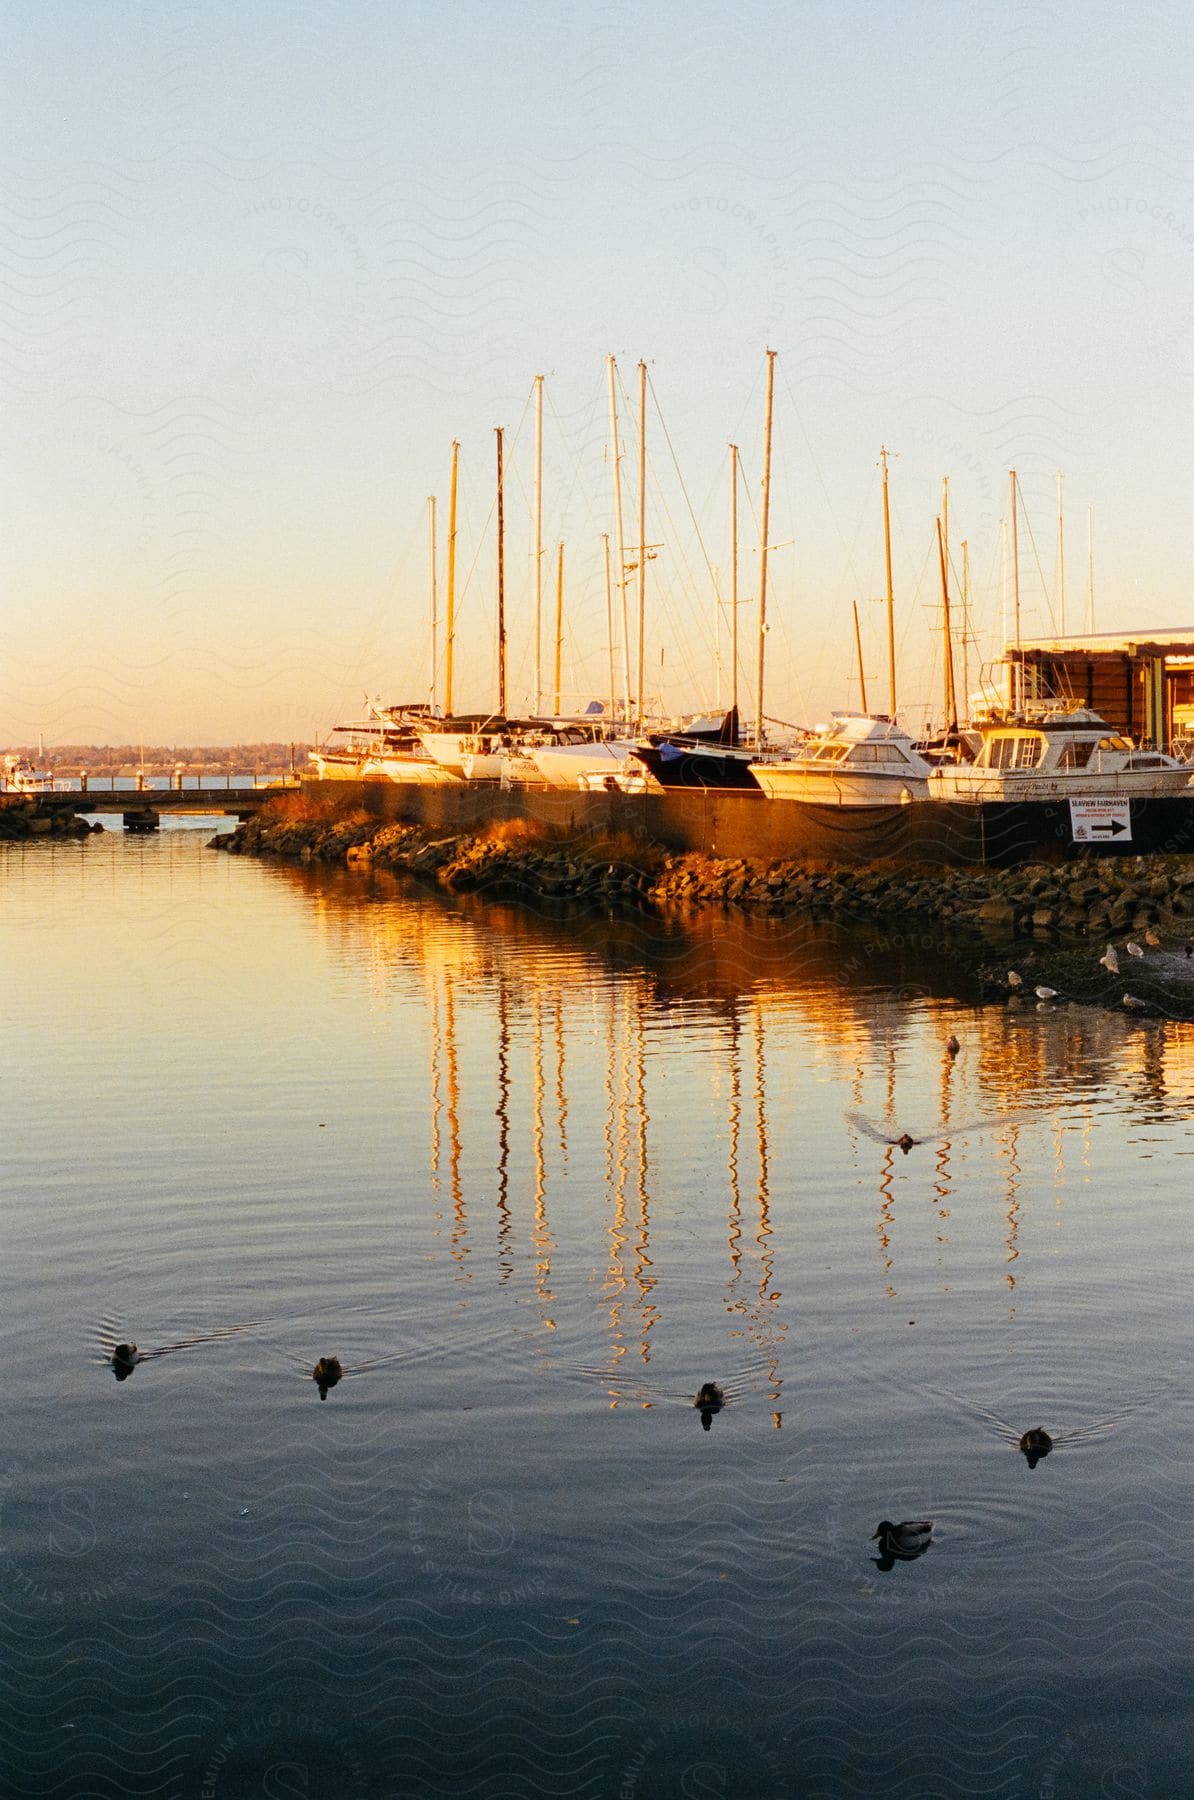 Coastline with marina and ducks in the water